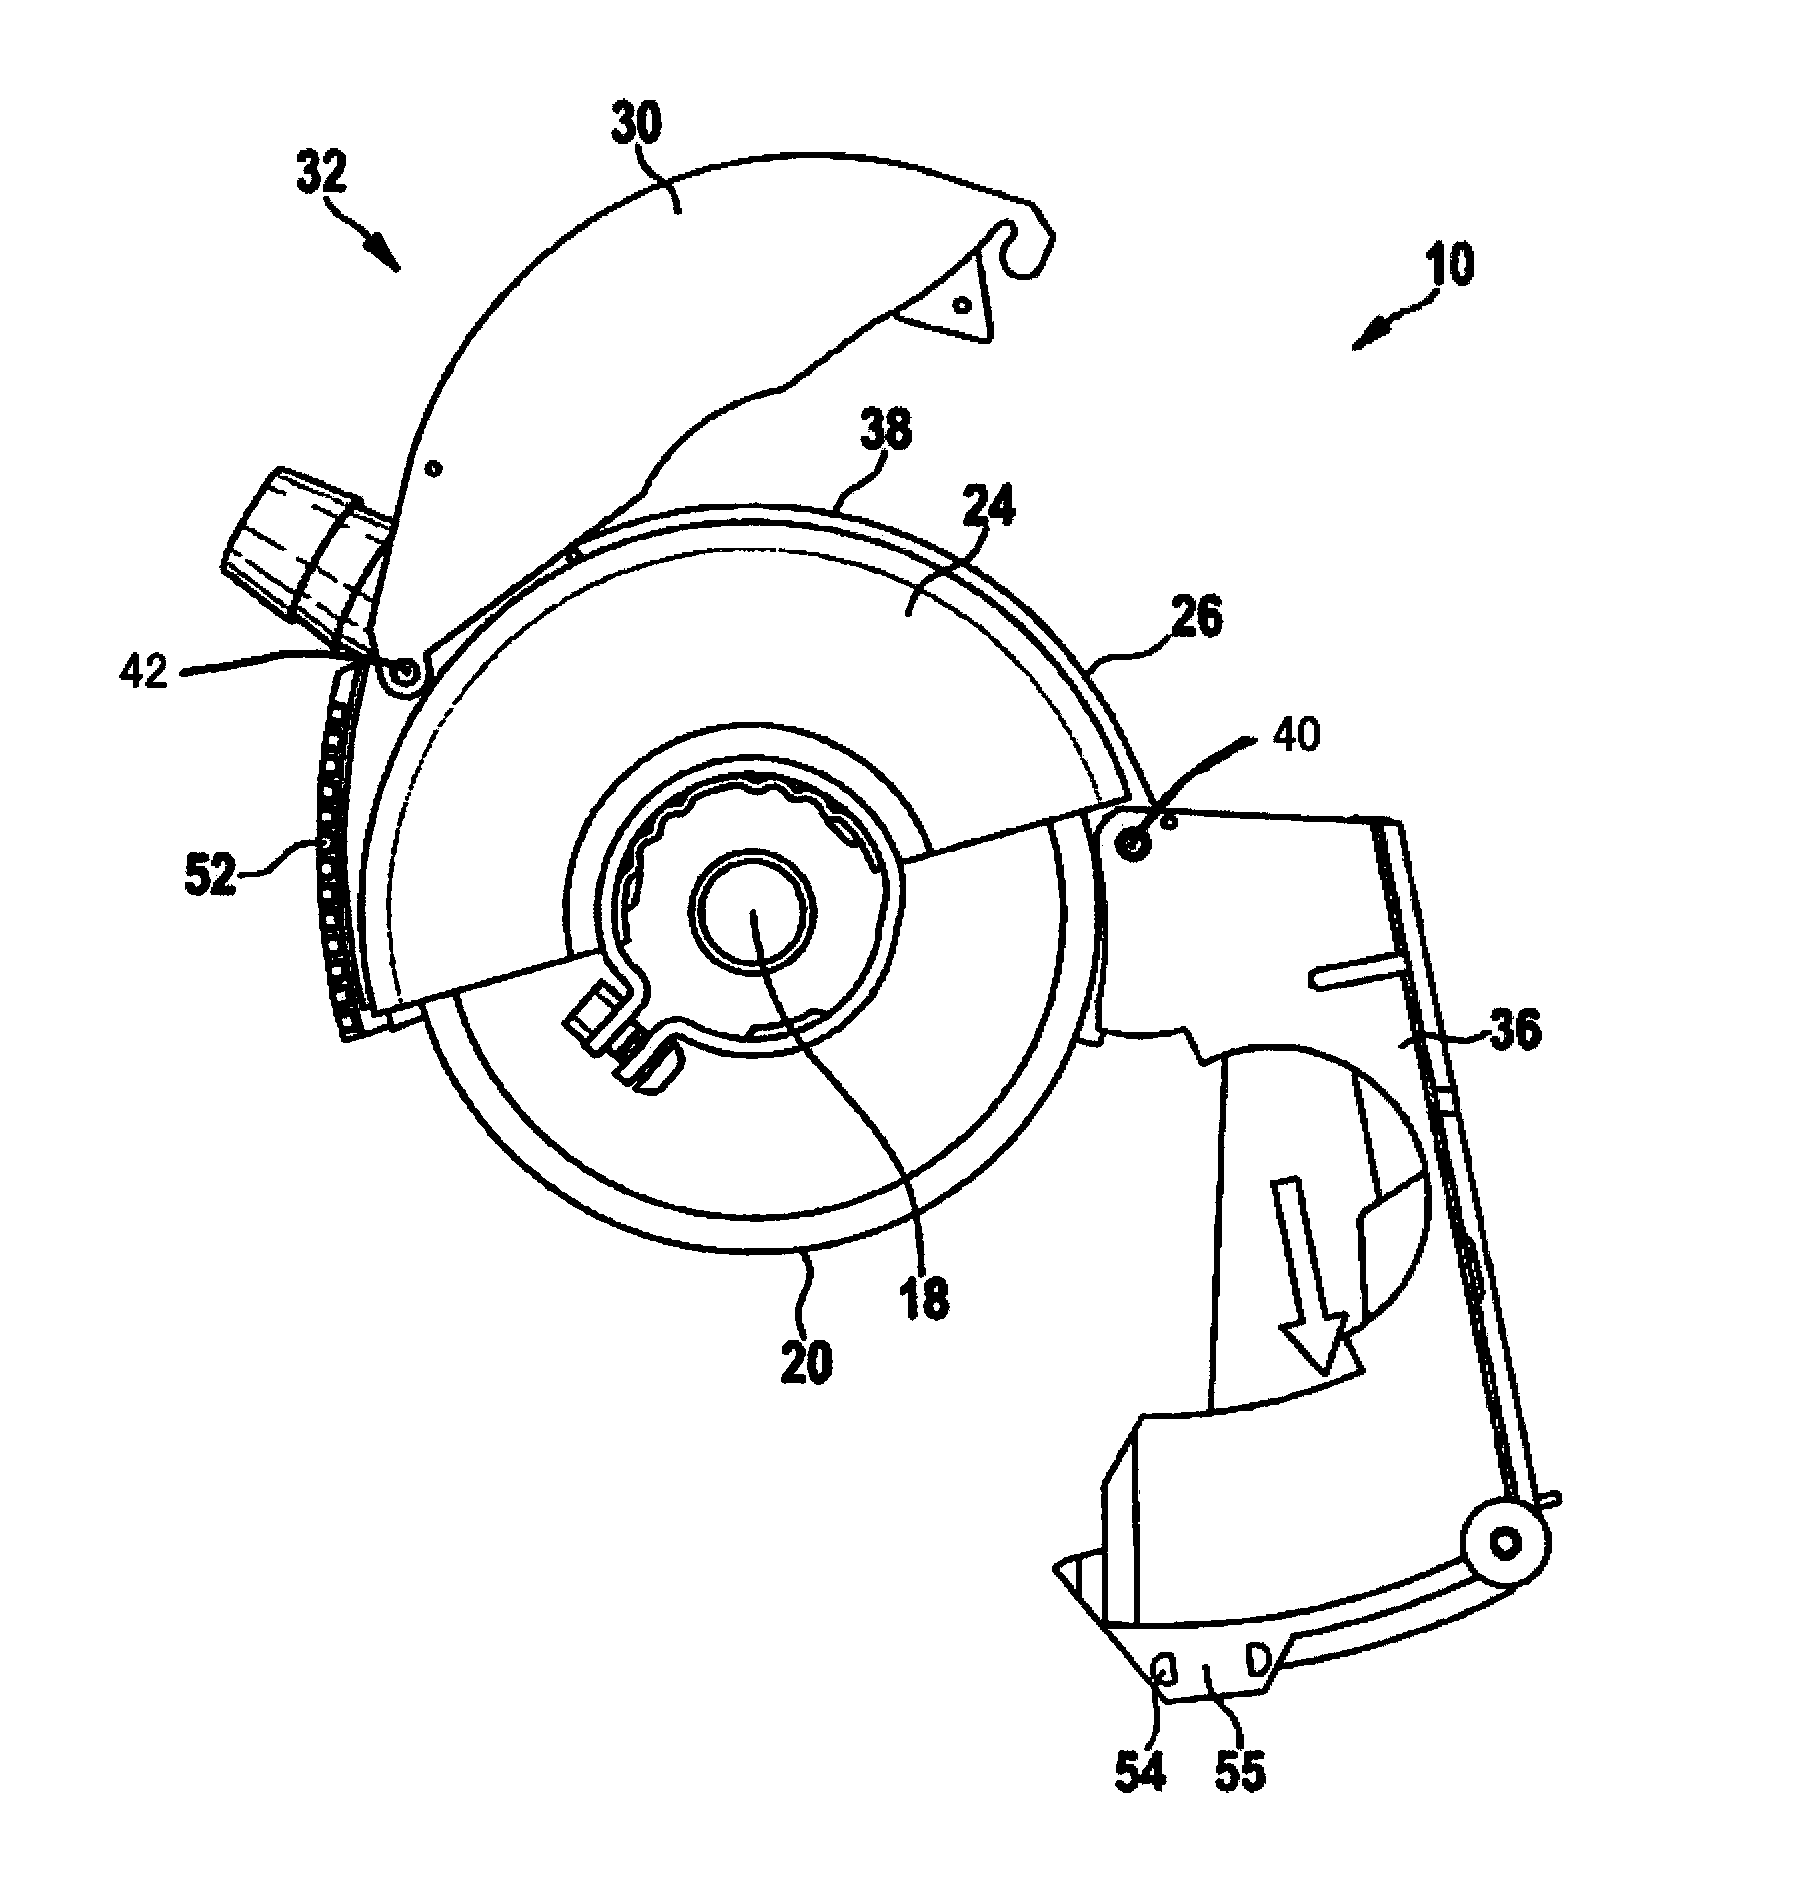 Cover device with dust suction device when used with electric tool